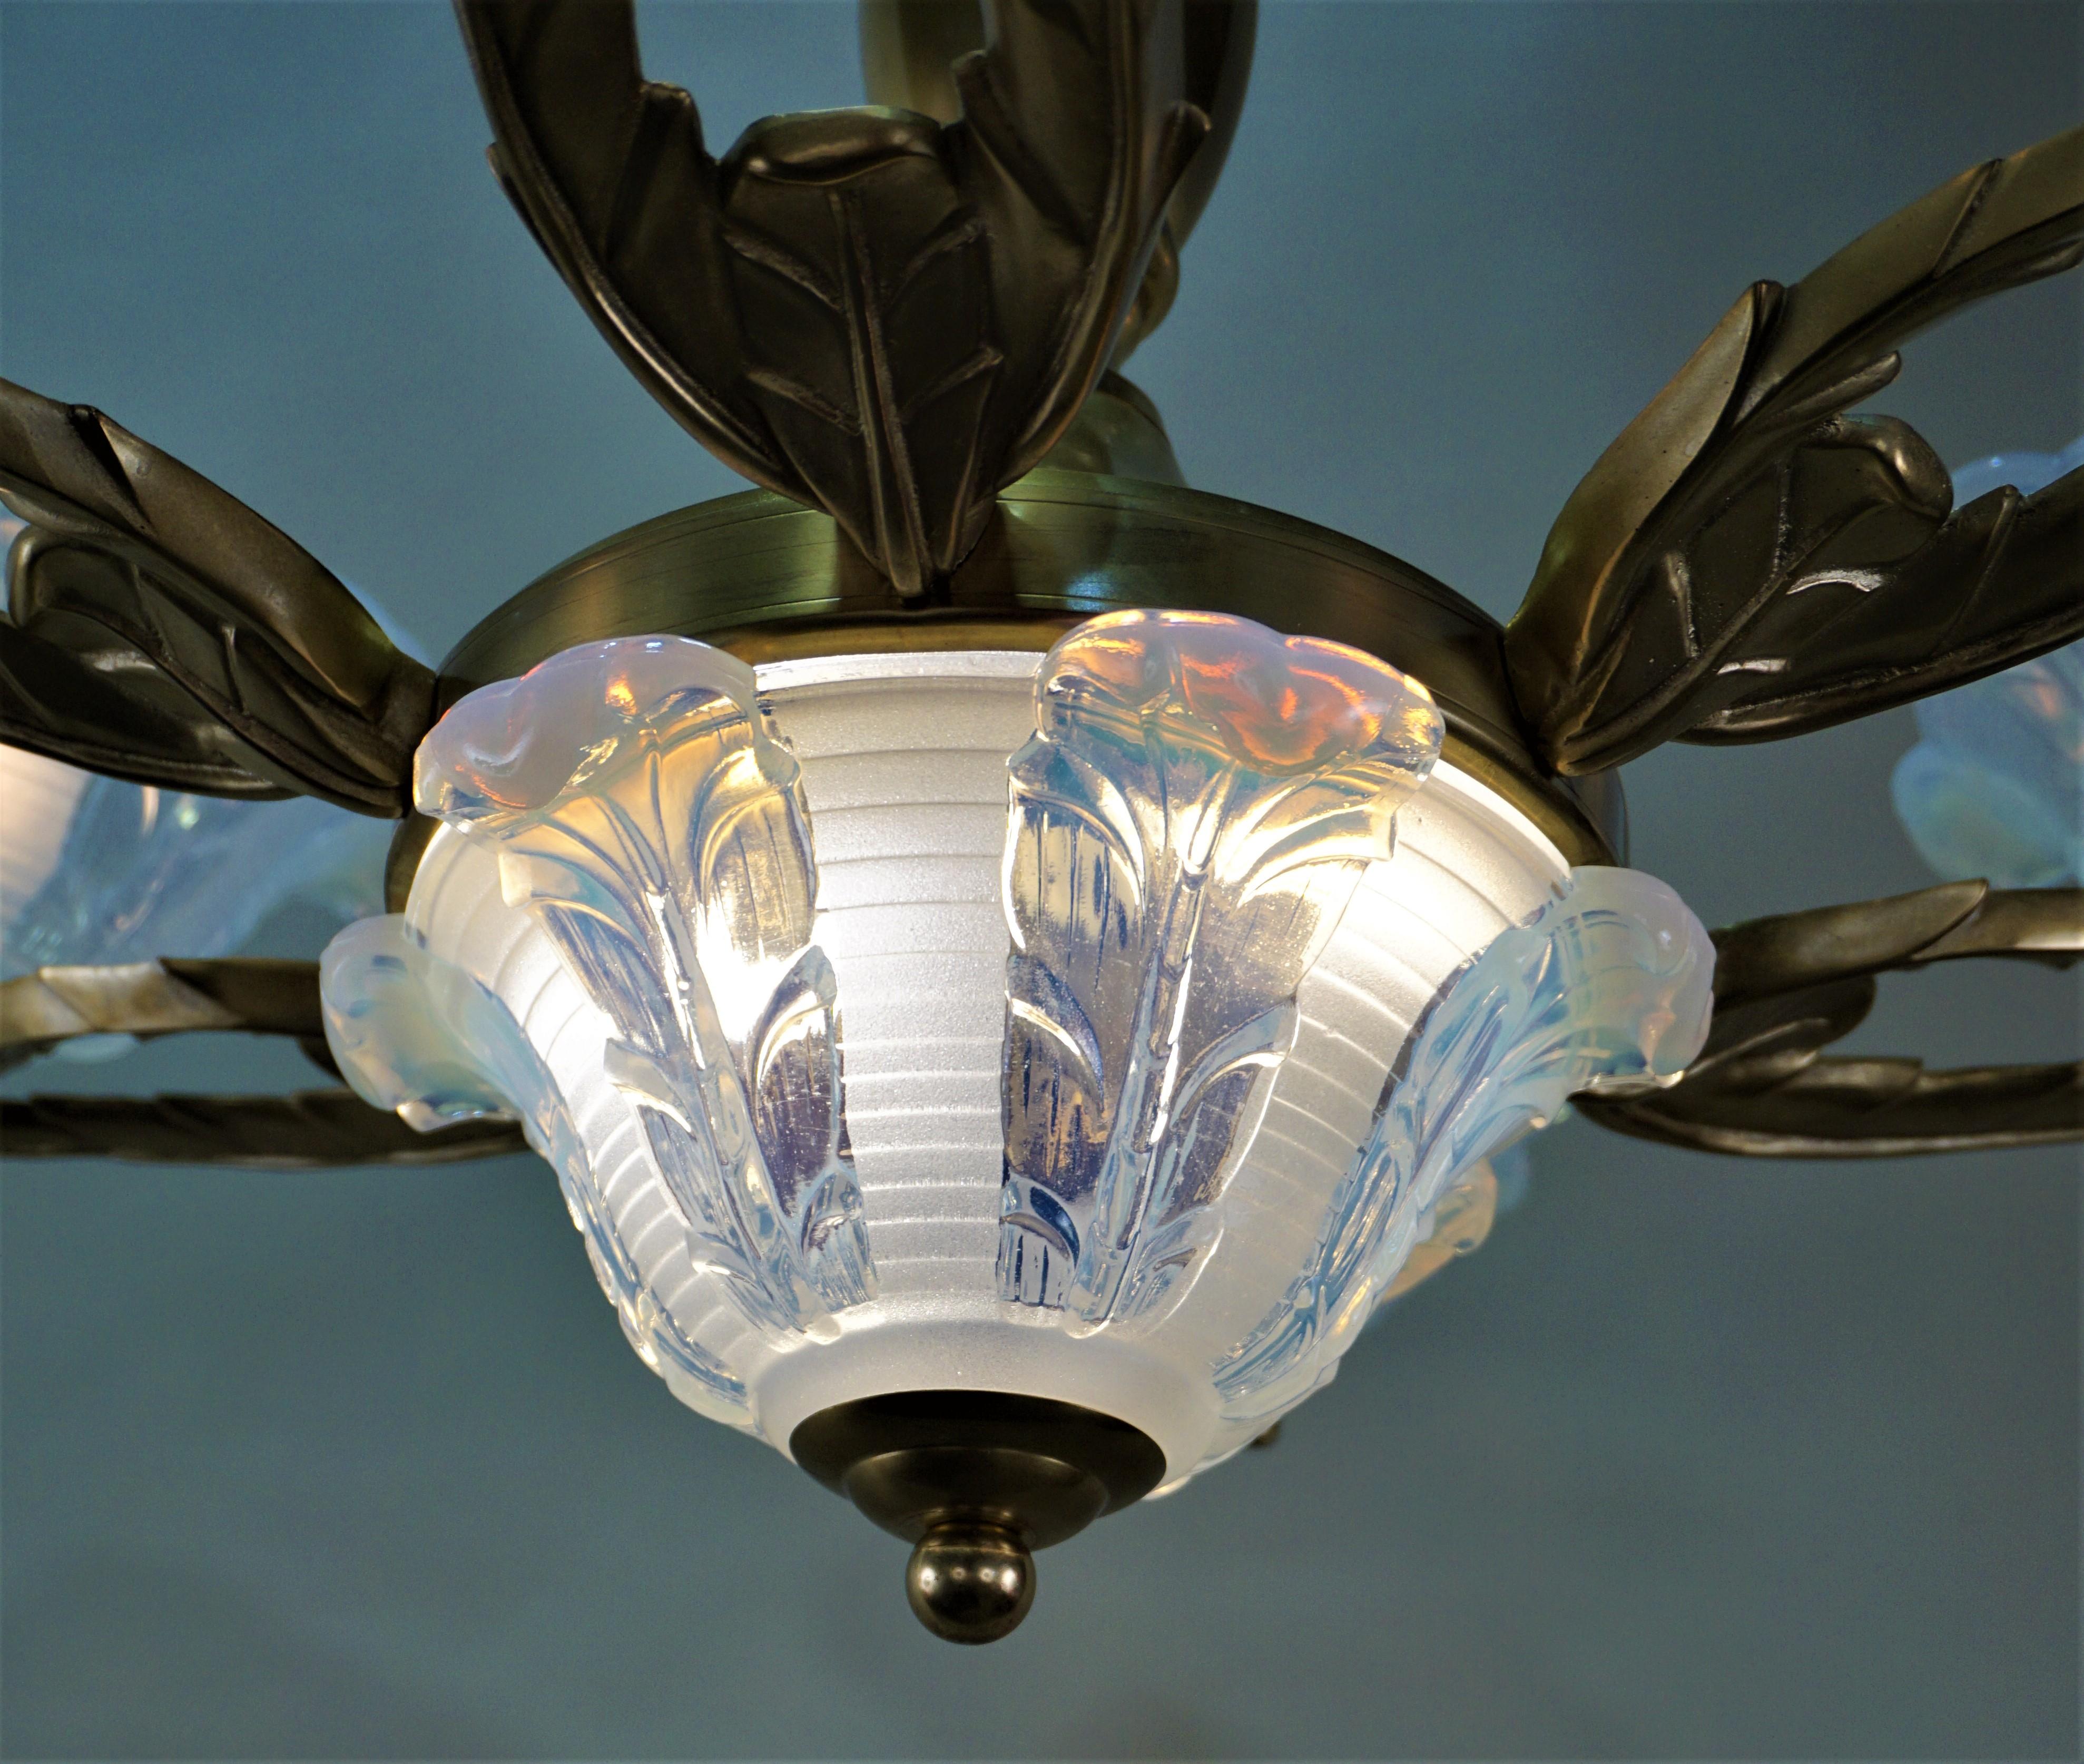 Mid-20th Century French Art Deco Chandelier with Opalescent Glass Shades by Ezan